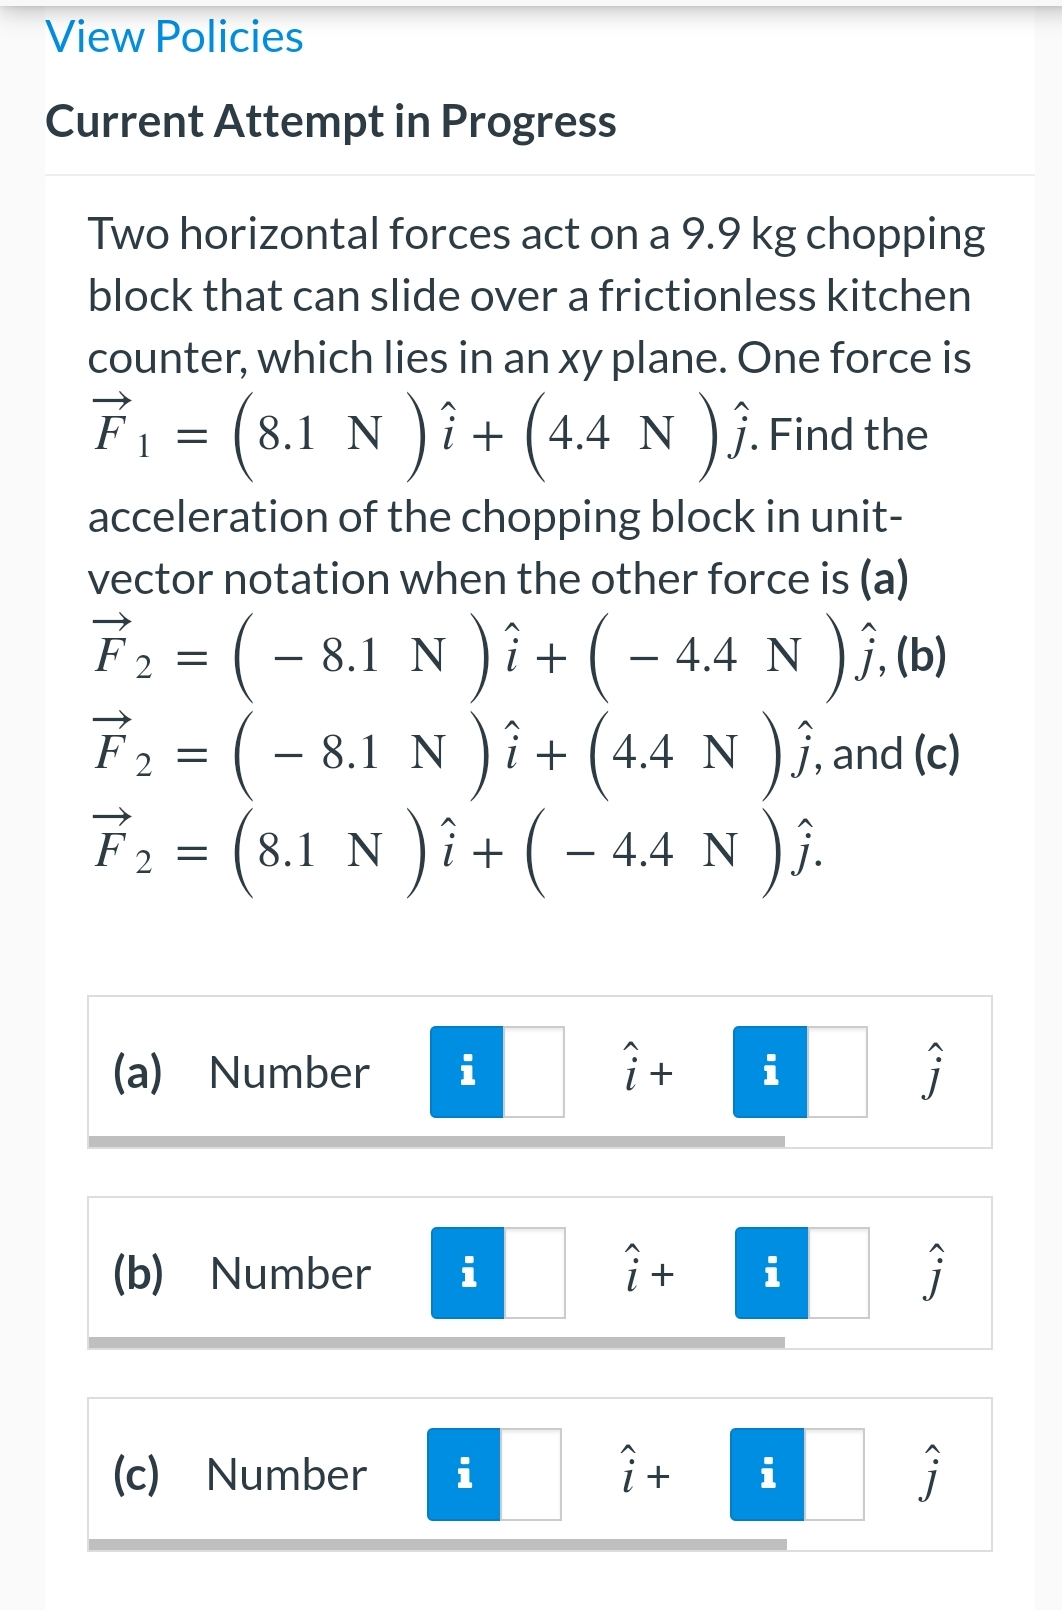 View Policies
Current Attempt in Progress
Two horizontal forces act on a 9.9 kg chopping
block that can slide over a frictionless kitchen
counter, which lies in an xy plane. One force is
F₁ = (8.1 N ) î + (4.4 N). Find the
1
acceleration of the chopping block in unit-
vector notation when the other force is (a)
) î
( - 4.4 N ), (b)
-
− 8.1 N )i + (4.4 N ), and (c)
8.1 N ) î + ( 4.4 N )ĵ.
F2
↑F ↑F
F 2
=
=
F₂ =
8.1 N
(a) Number i
(b) Number
(c) Number
i
i
+
i +
î+
(.
+
i
i
Ĵ
‹'
i Ĵ